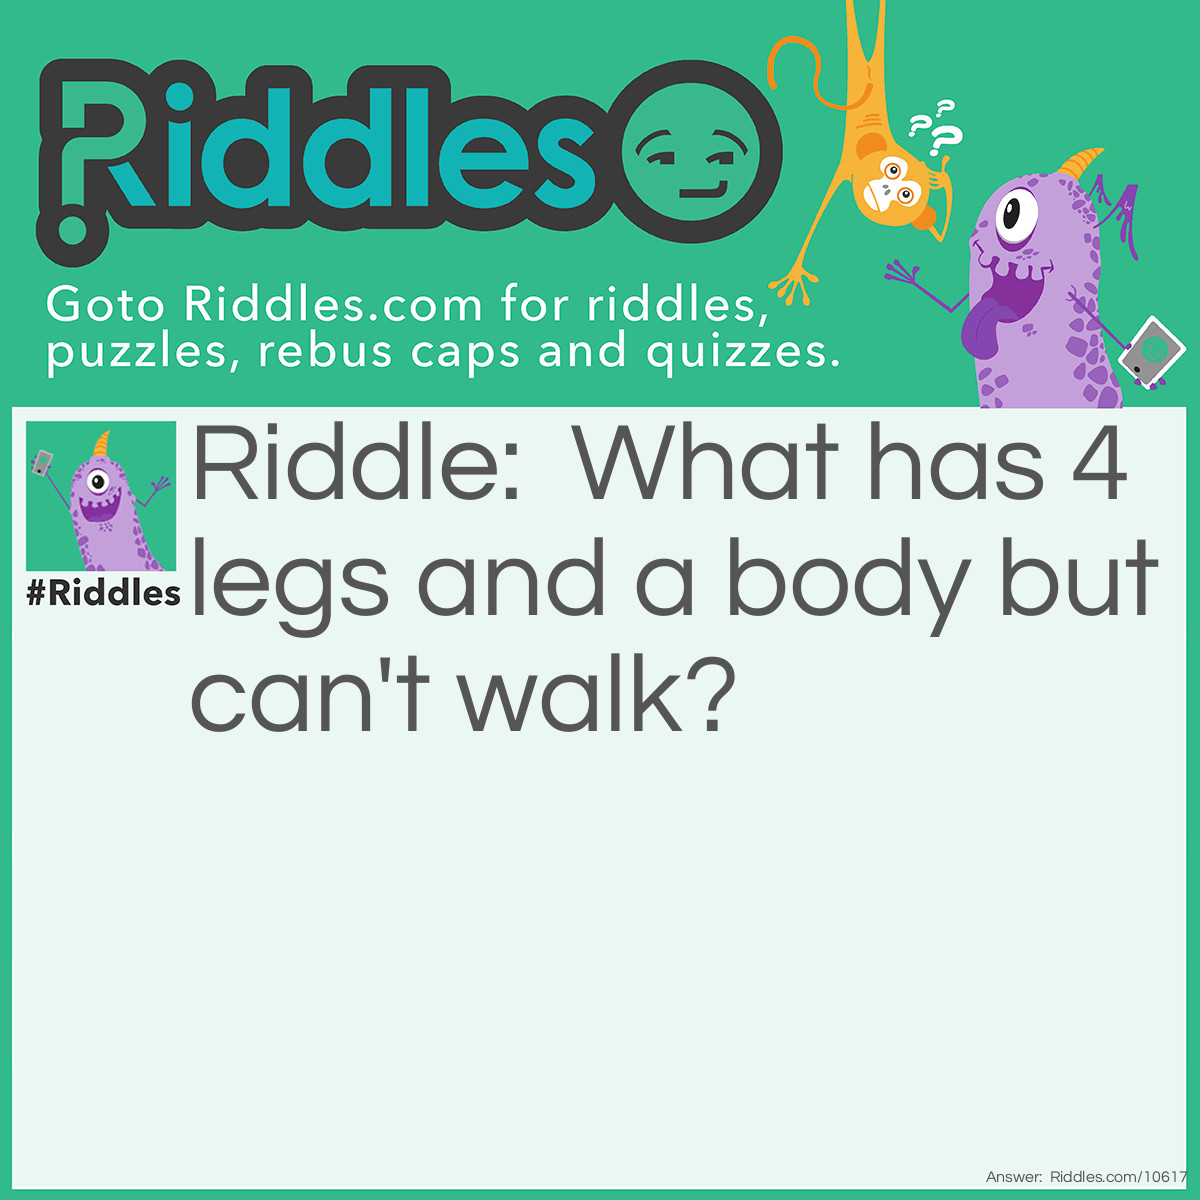 Riddle: What has 4 legs and a body but can't walk? Answer: A table.